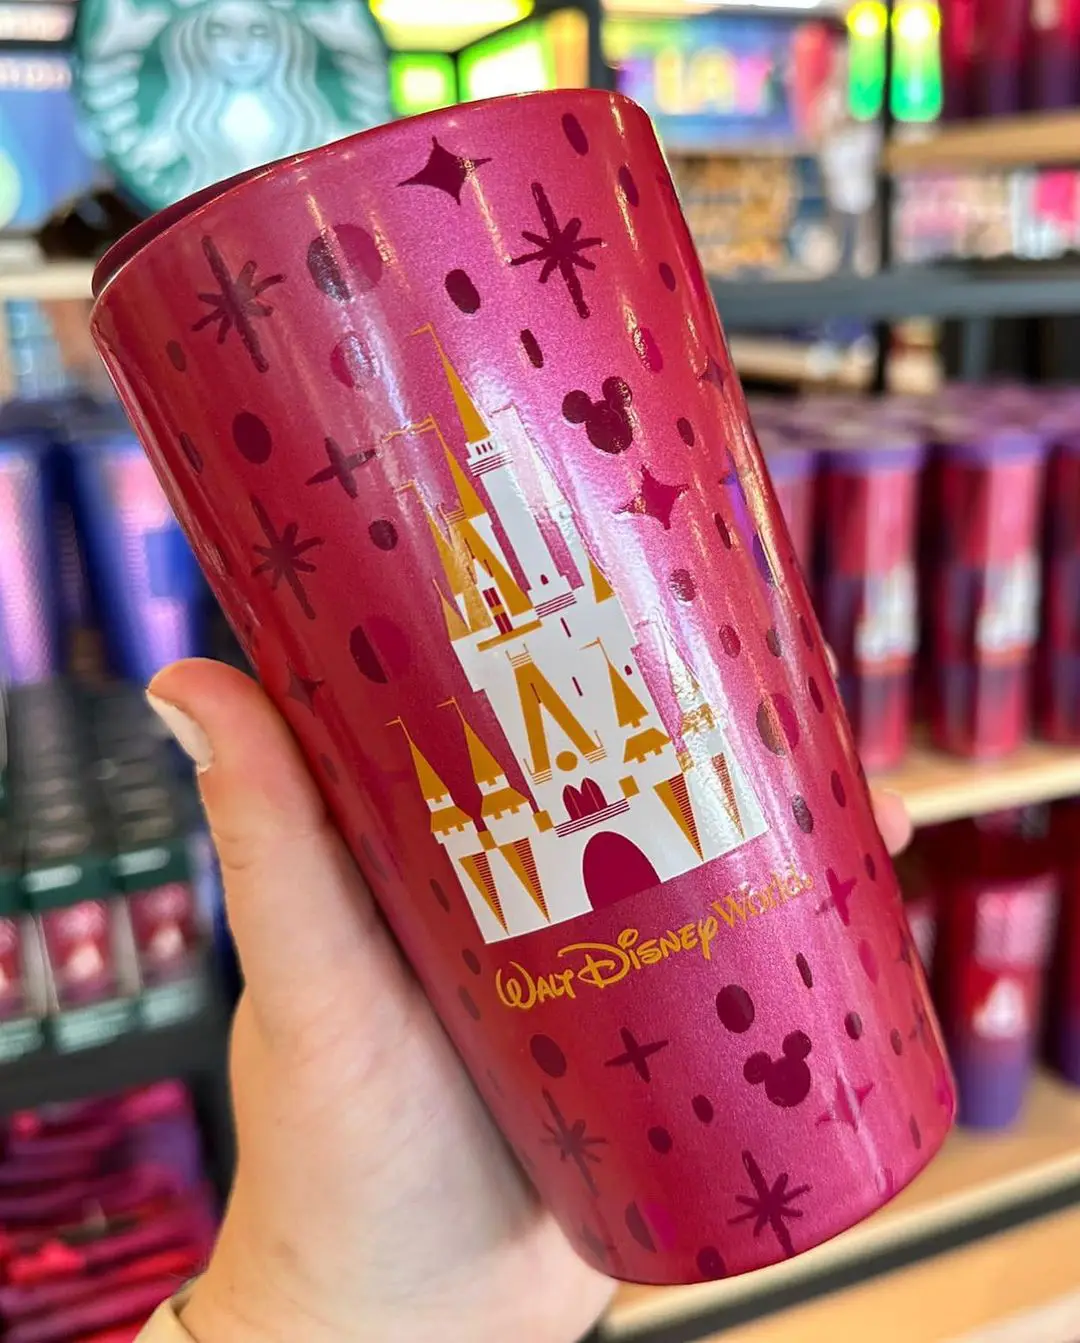 Have you seen this new #DisneyStarbucks Tumbler that just released at